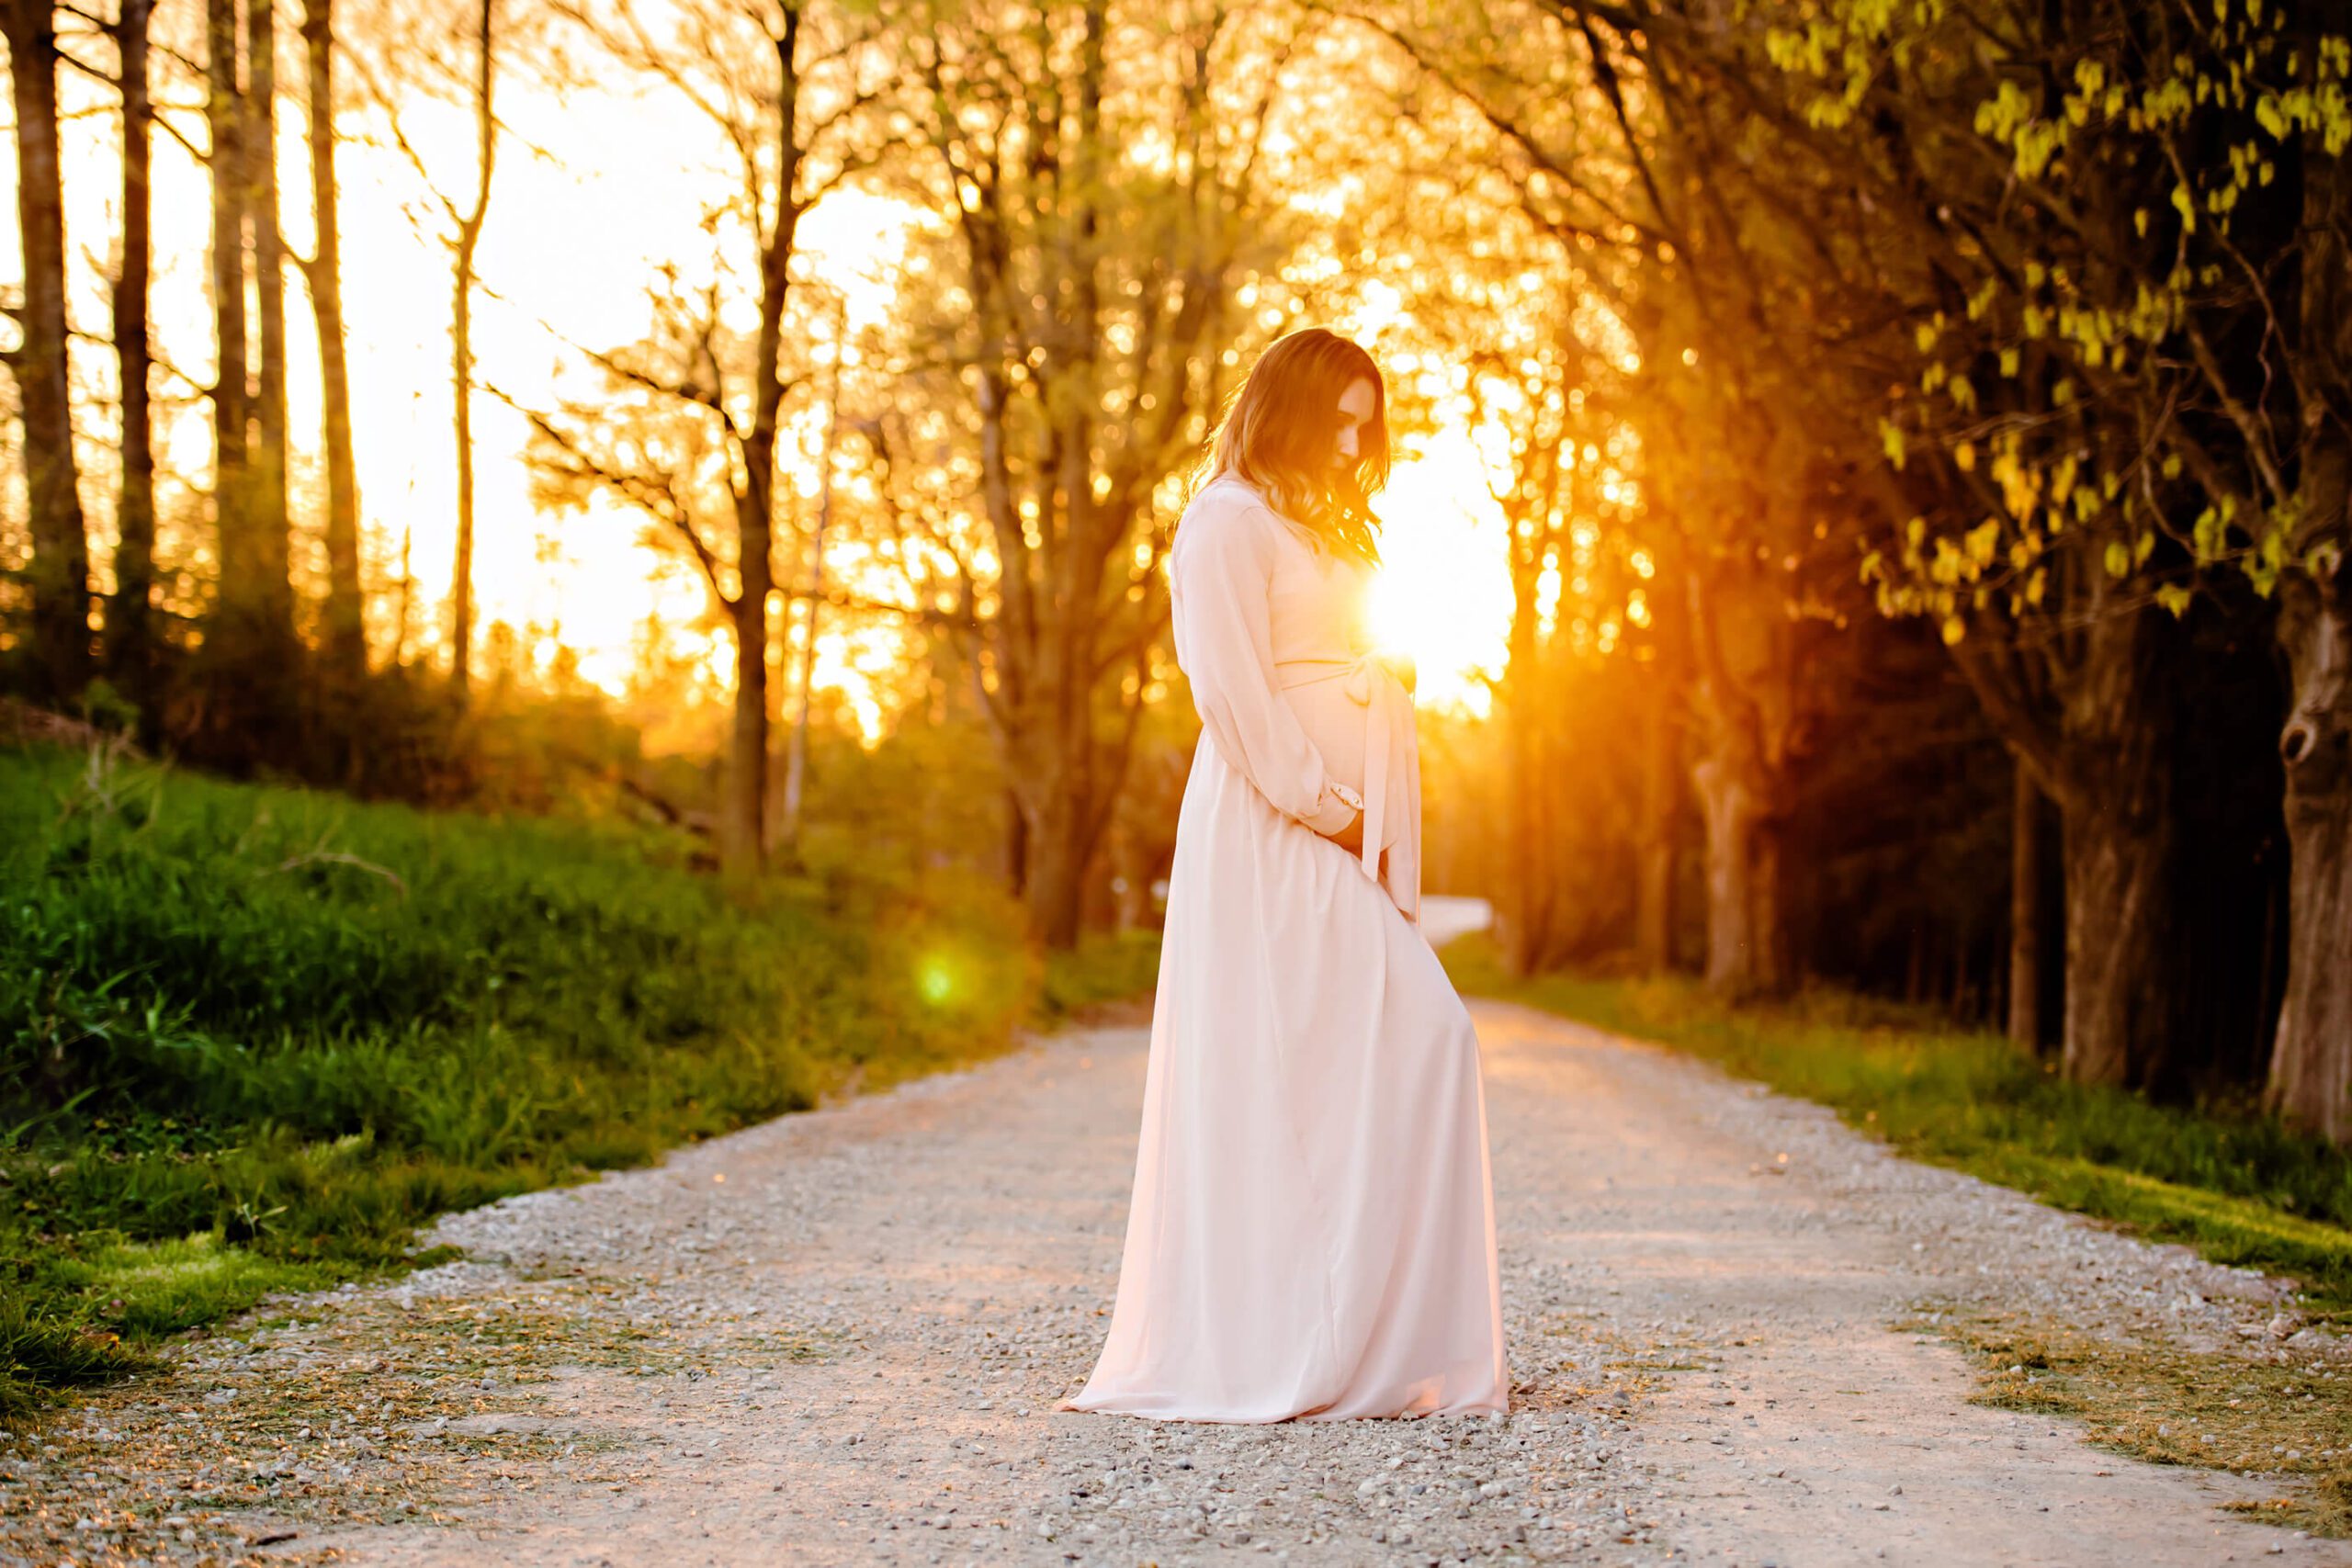 sunflare maternity photography session by Gibson Photography award-winning photographer